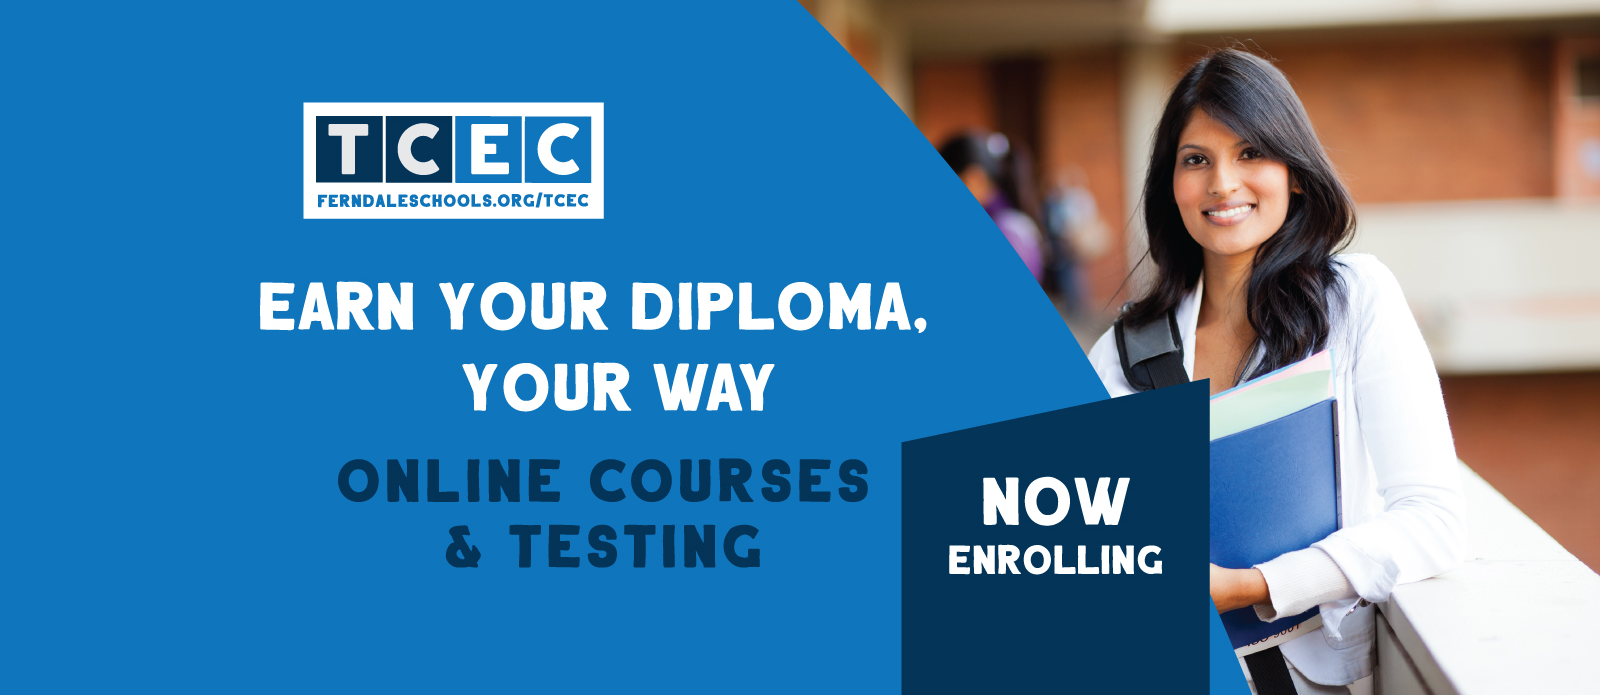 Earn your diploma, your wat. online courses and testing. free chromebook.